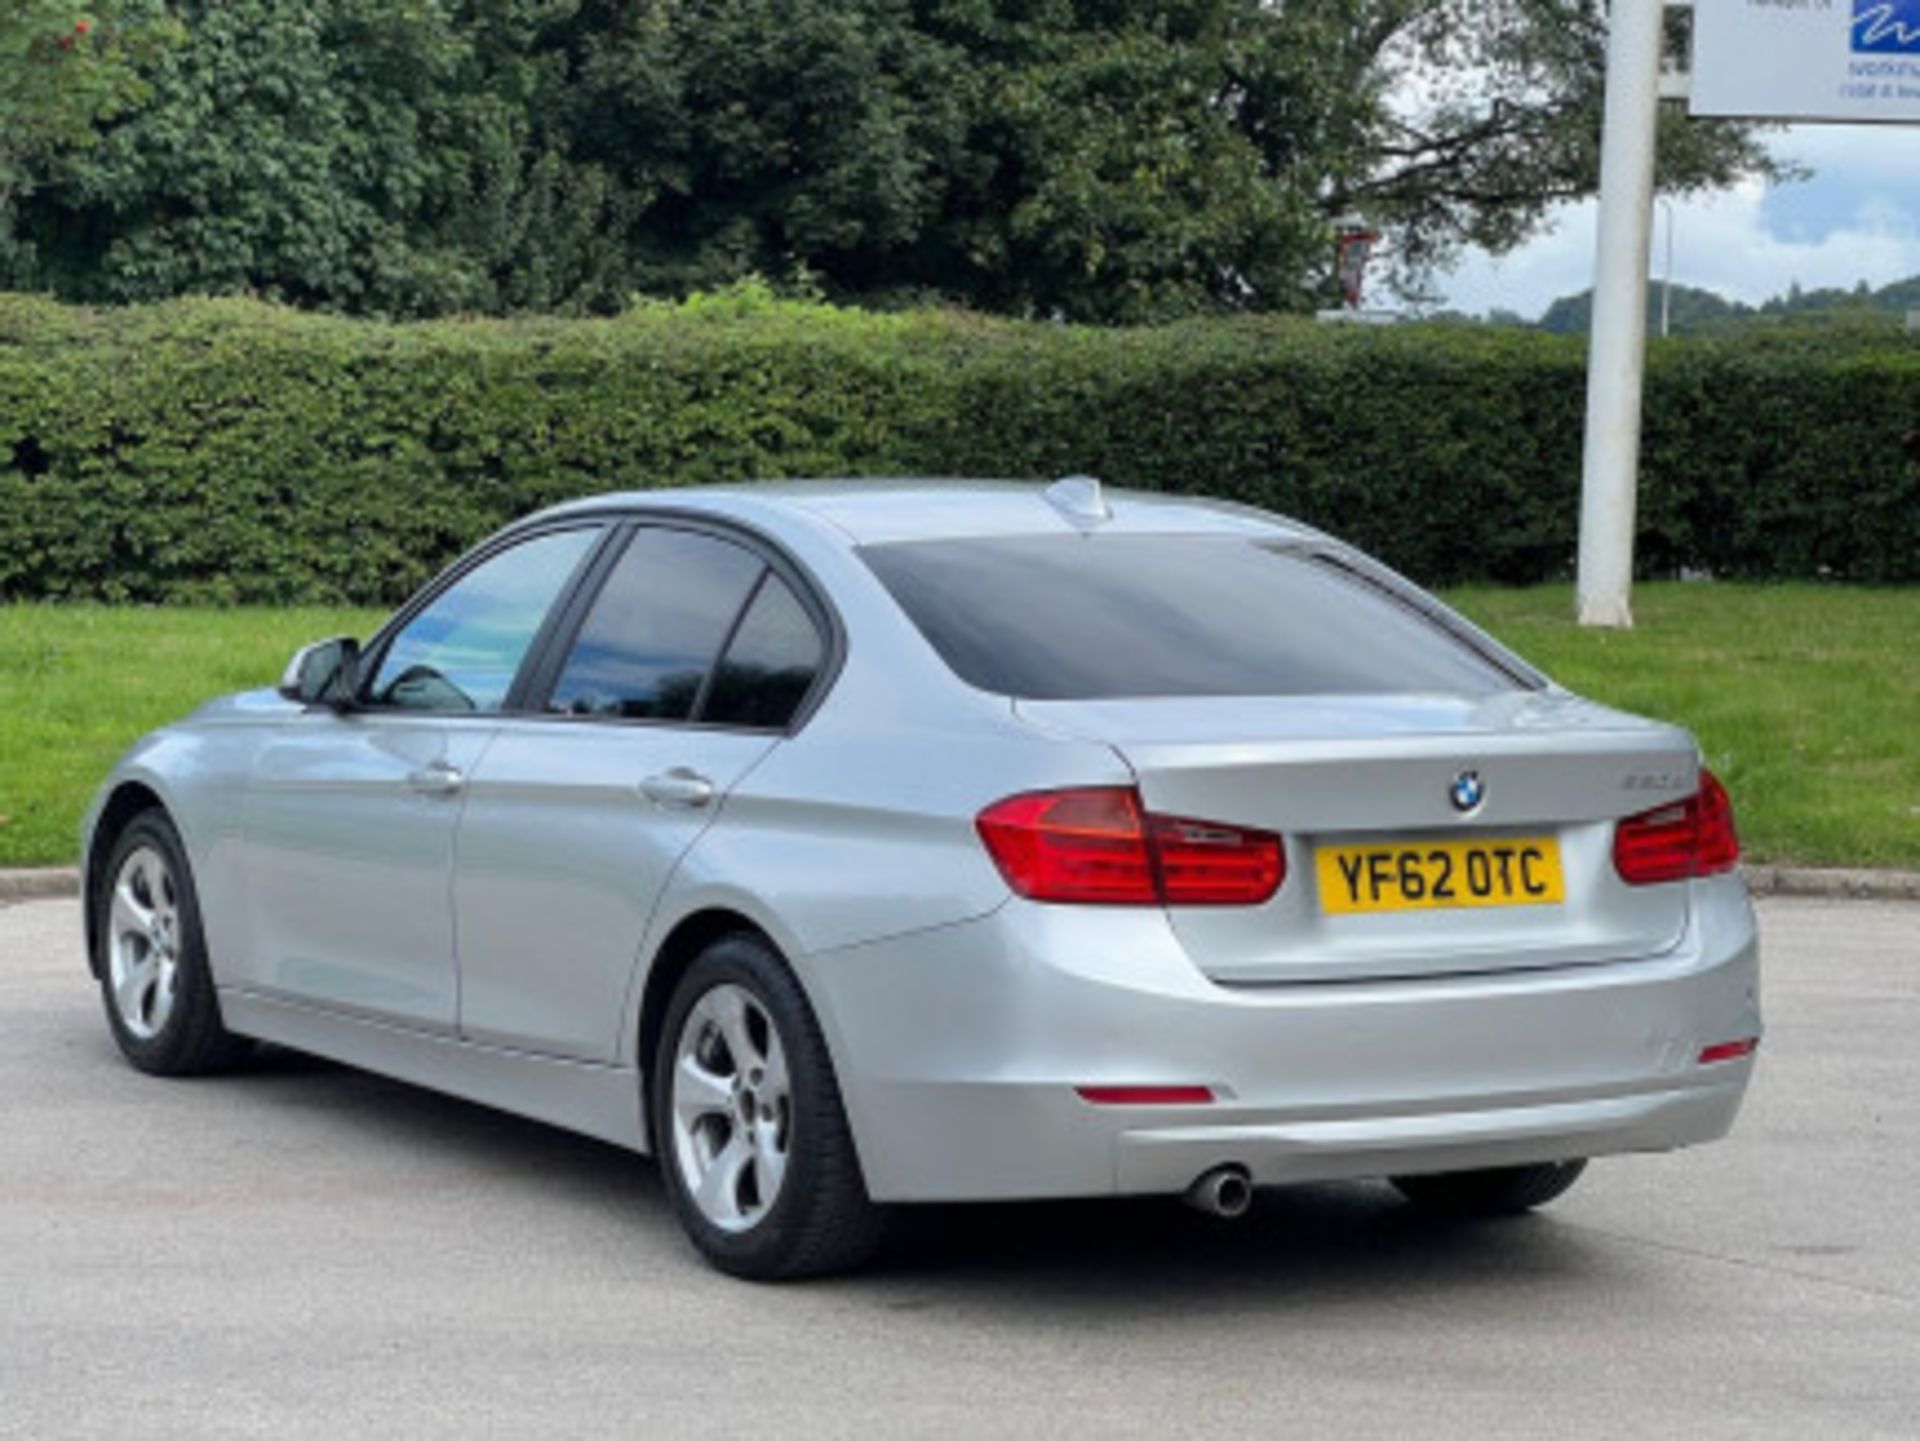 BMW 3 SERIES 2.0 DIESEL ED START STOP - A WELL-MAINTAINED GEM >>--NO VAT ON HAMMER--<< - Image 123 of 229